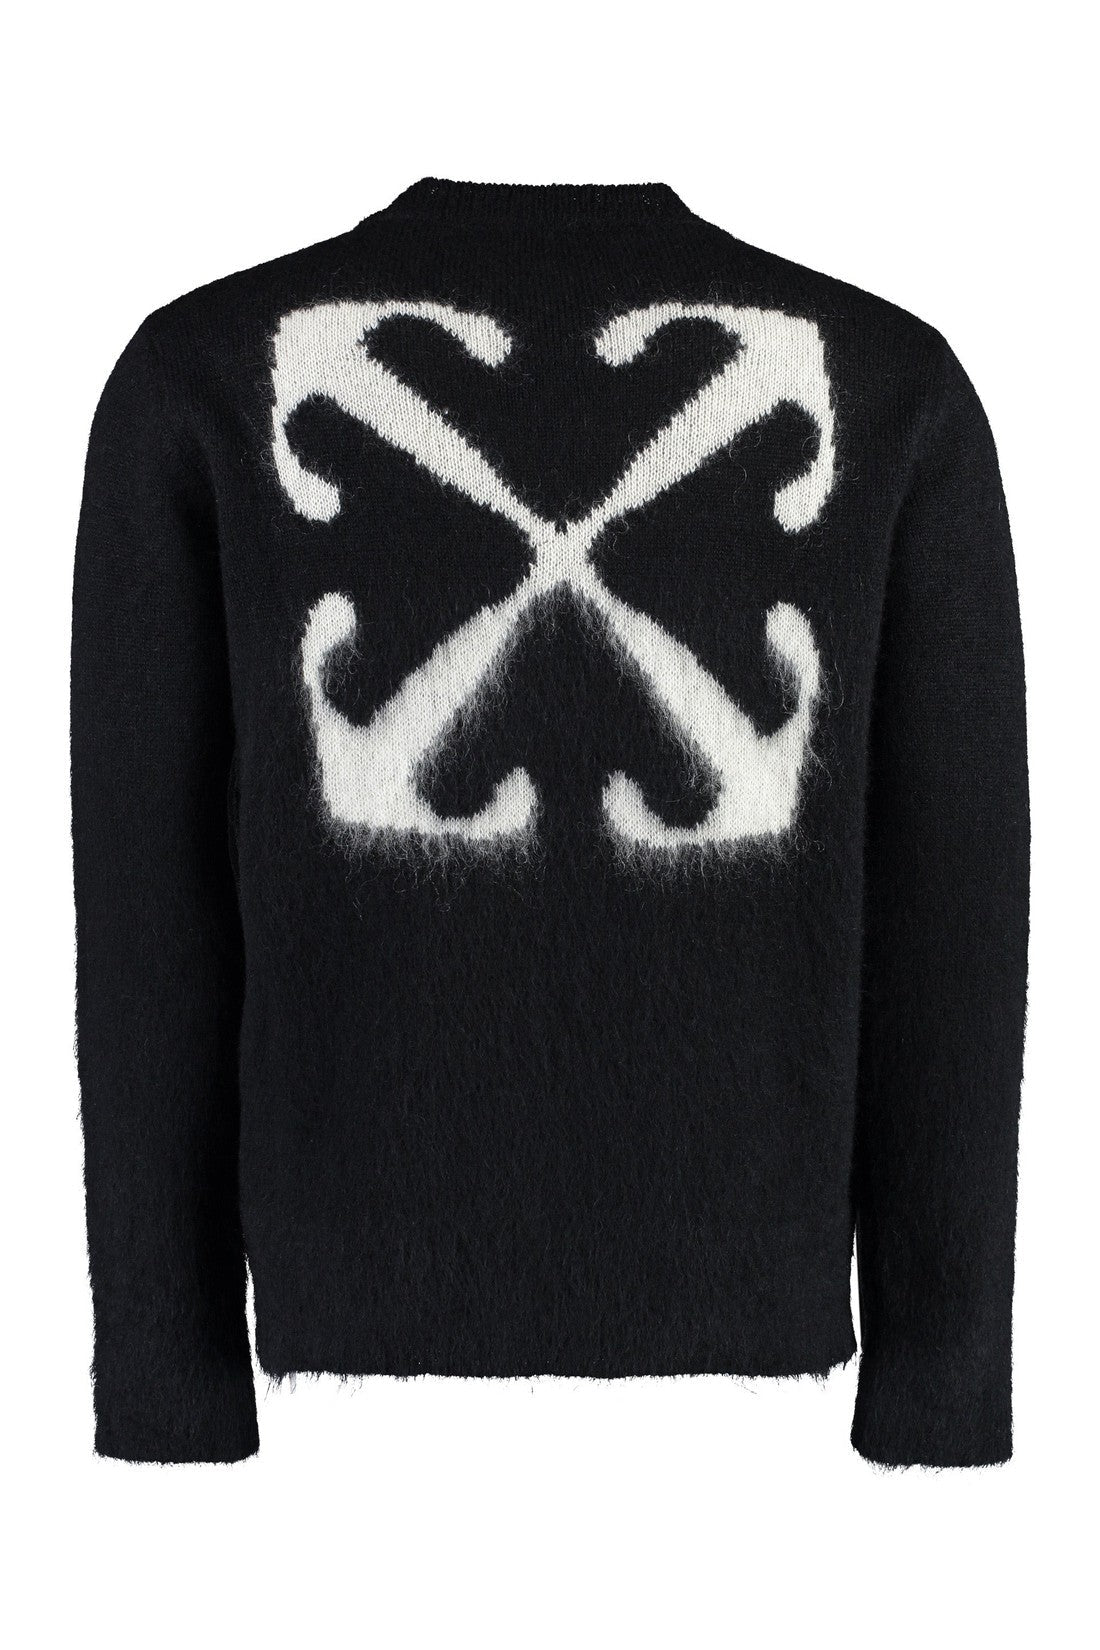 Off-White-OUTLET-SALE-Mohair blend sweater-ARCHIVIST